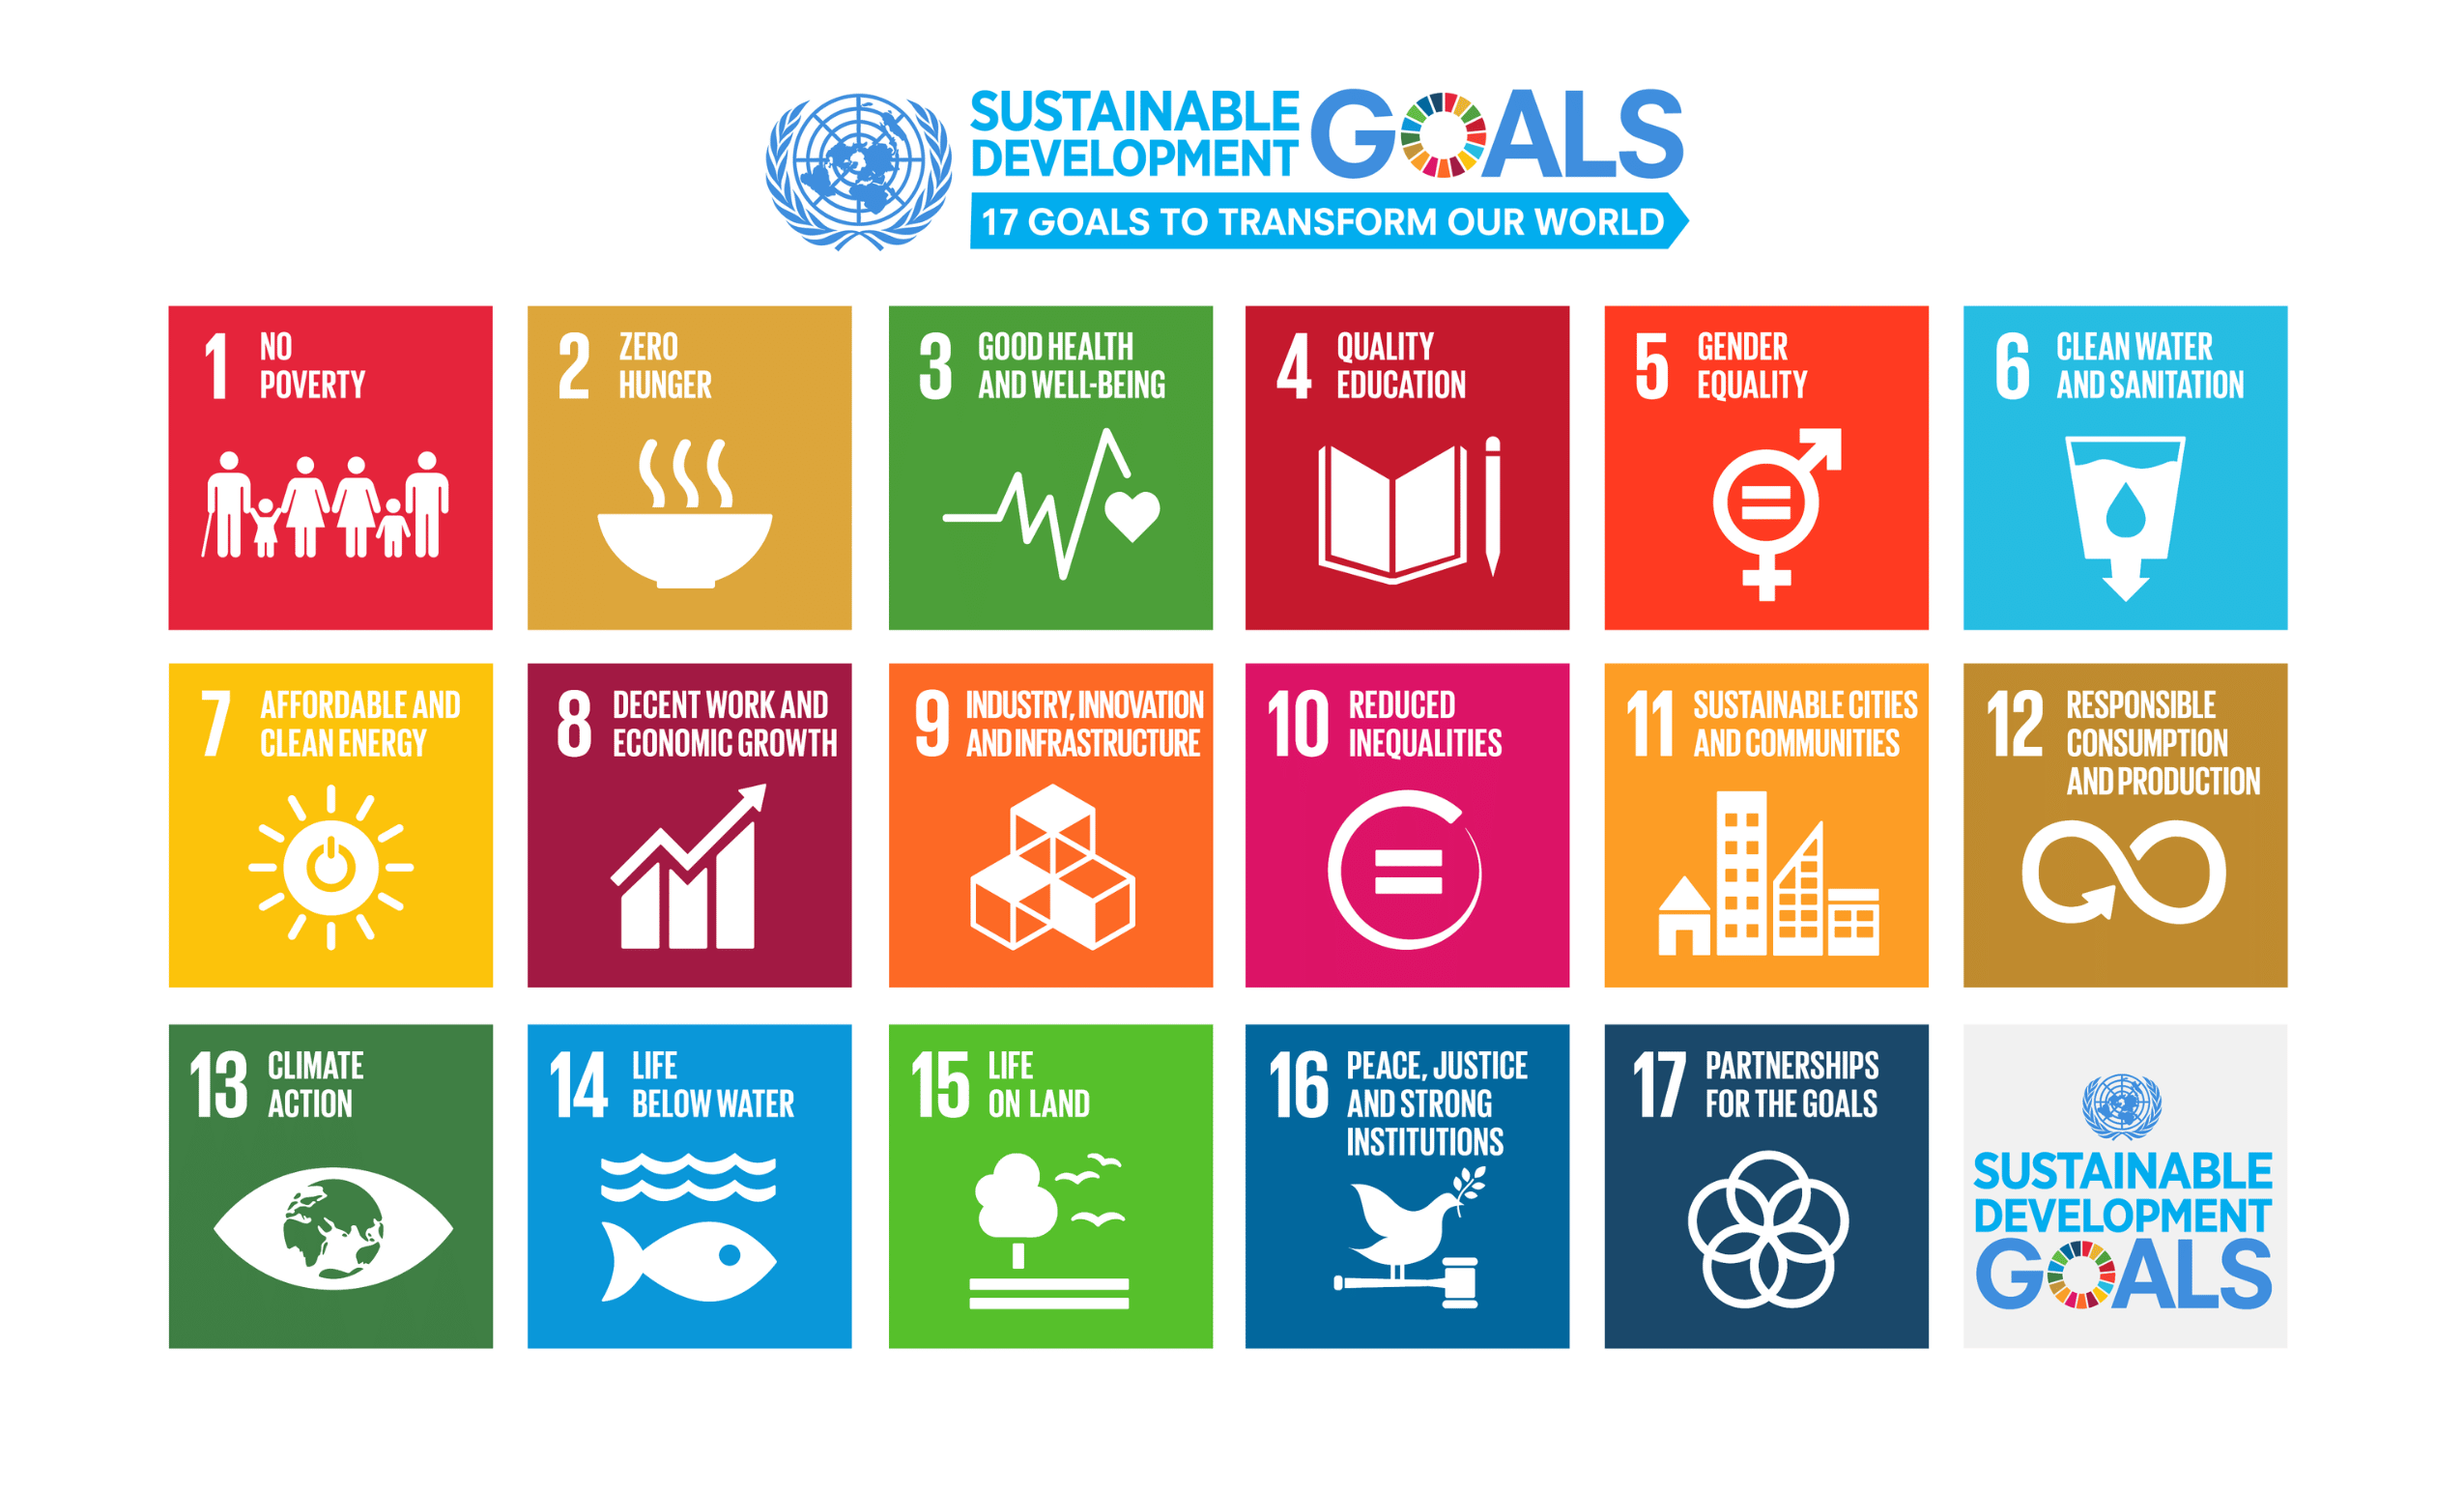 SDGS - United Nations Sustainable Development Goals - SMEs and Sustainability